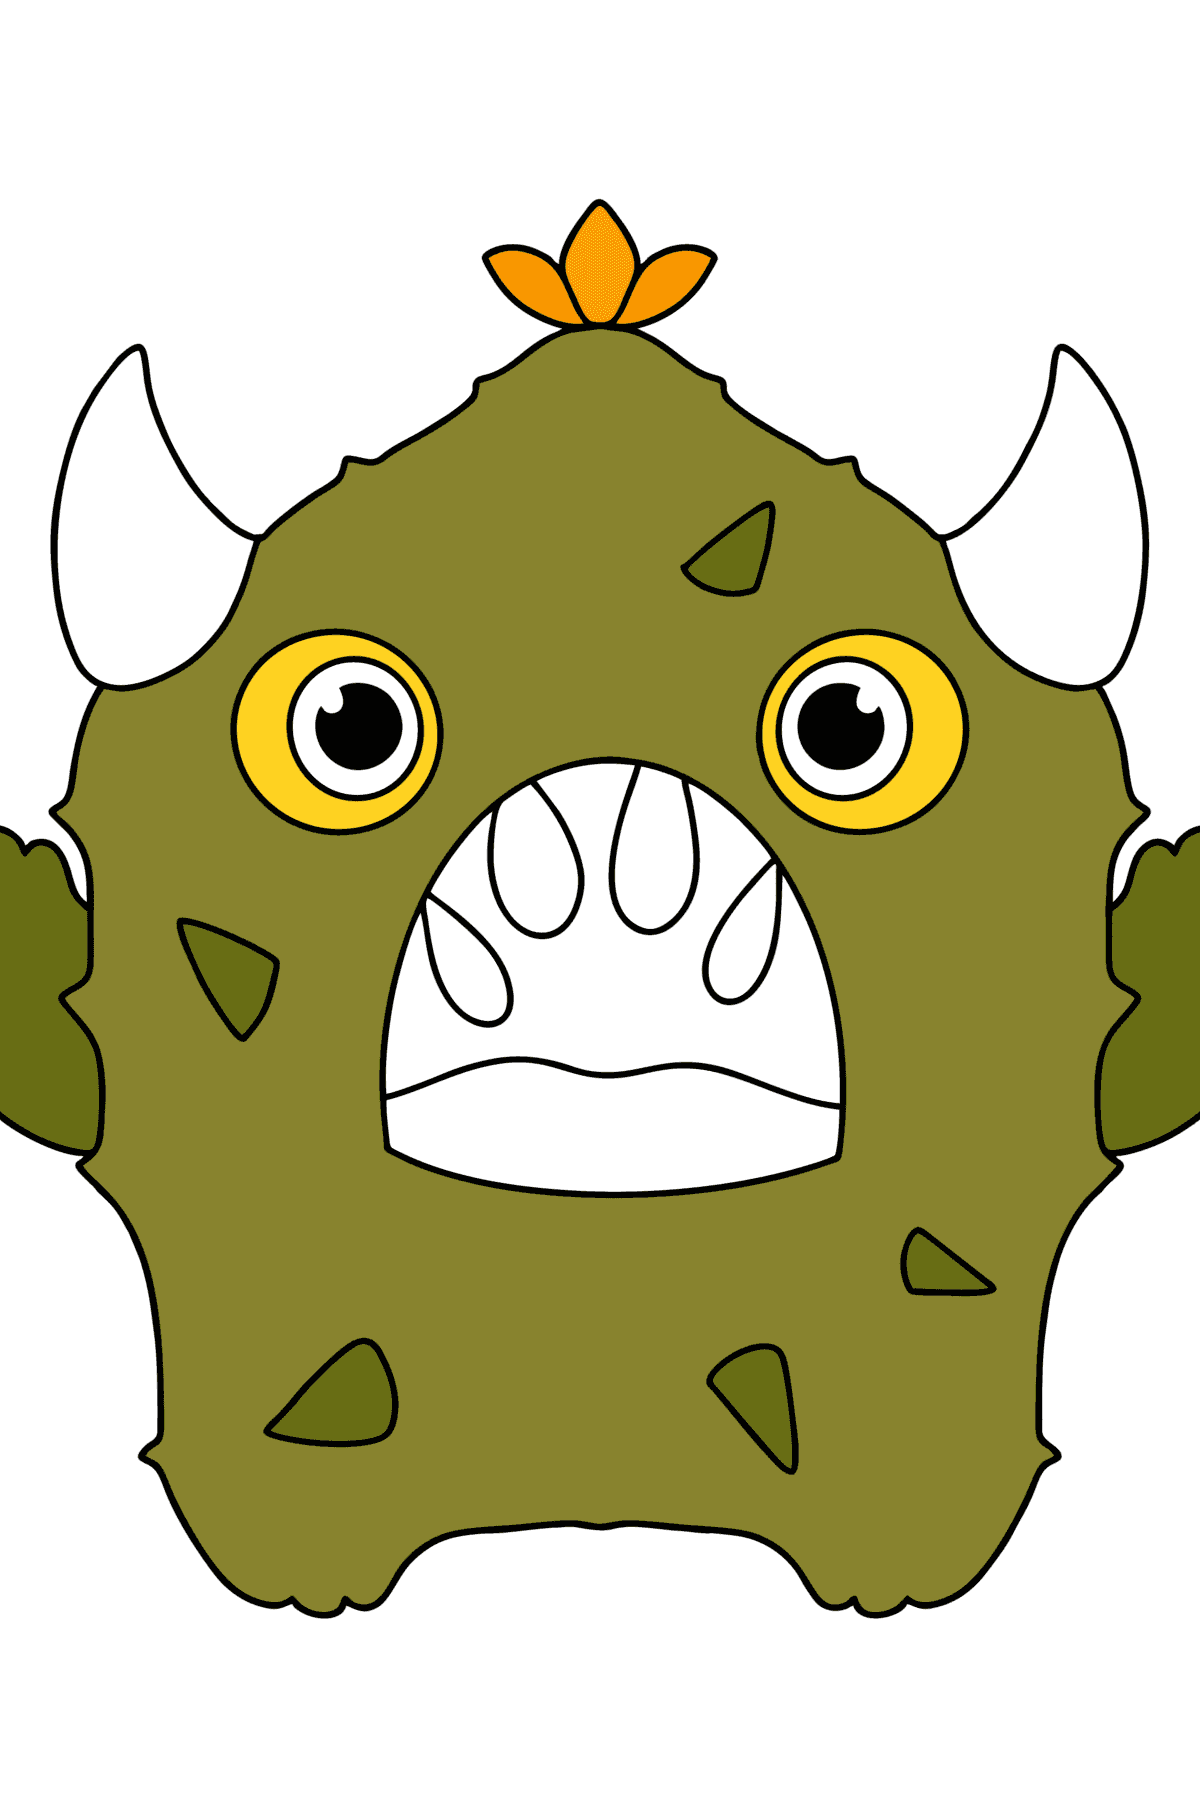 Monster cucumber сoloring page - Coloring Pages for Kids